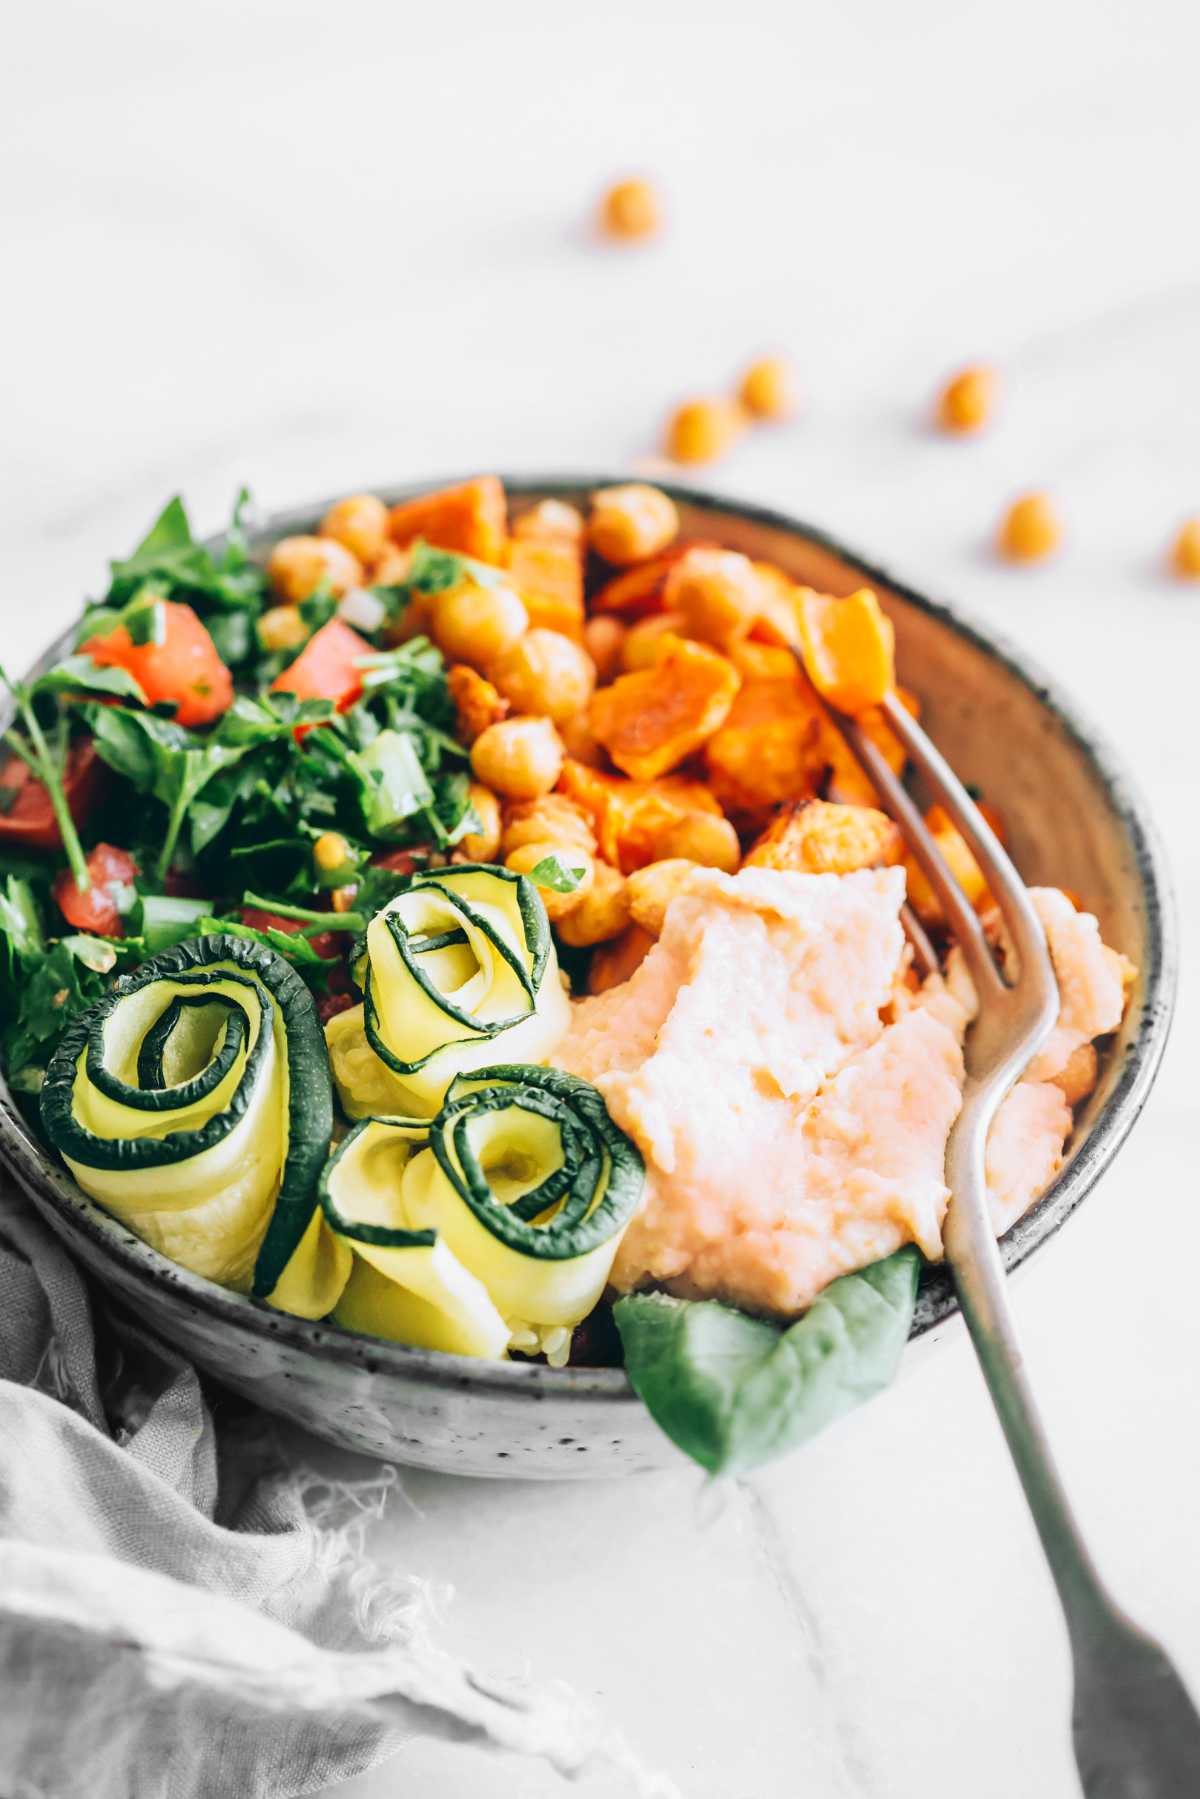 bowl of greens, sweet potatoes, chickpeas and hummus with a fork